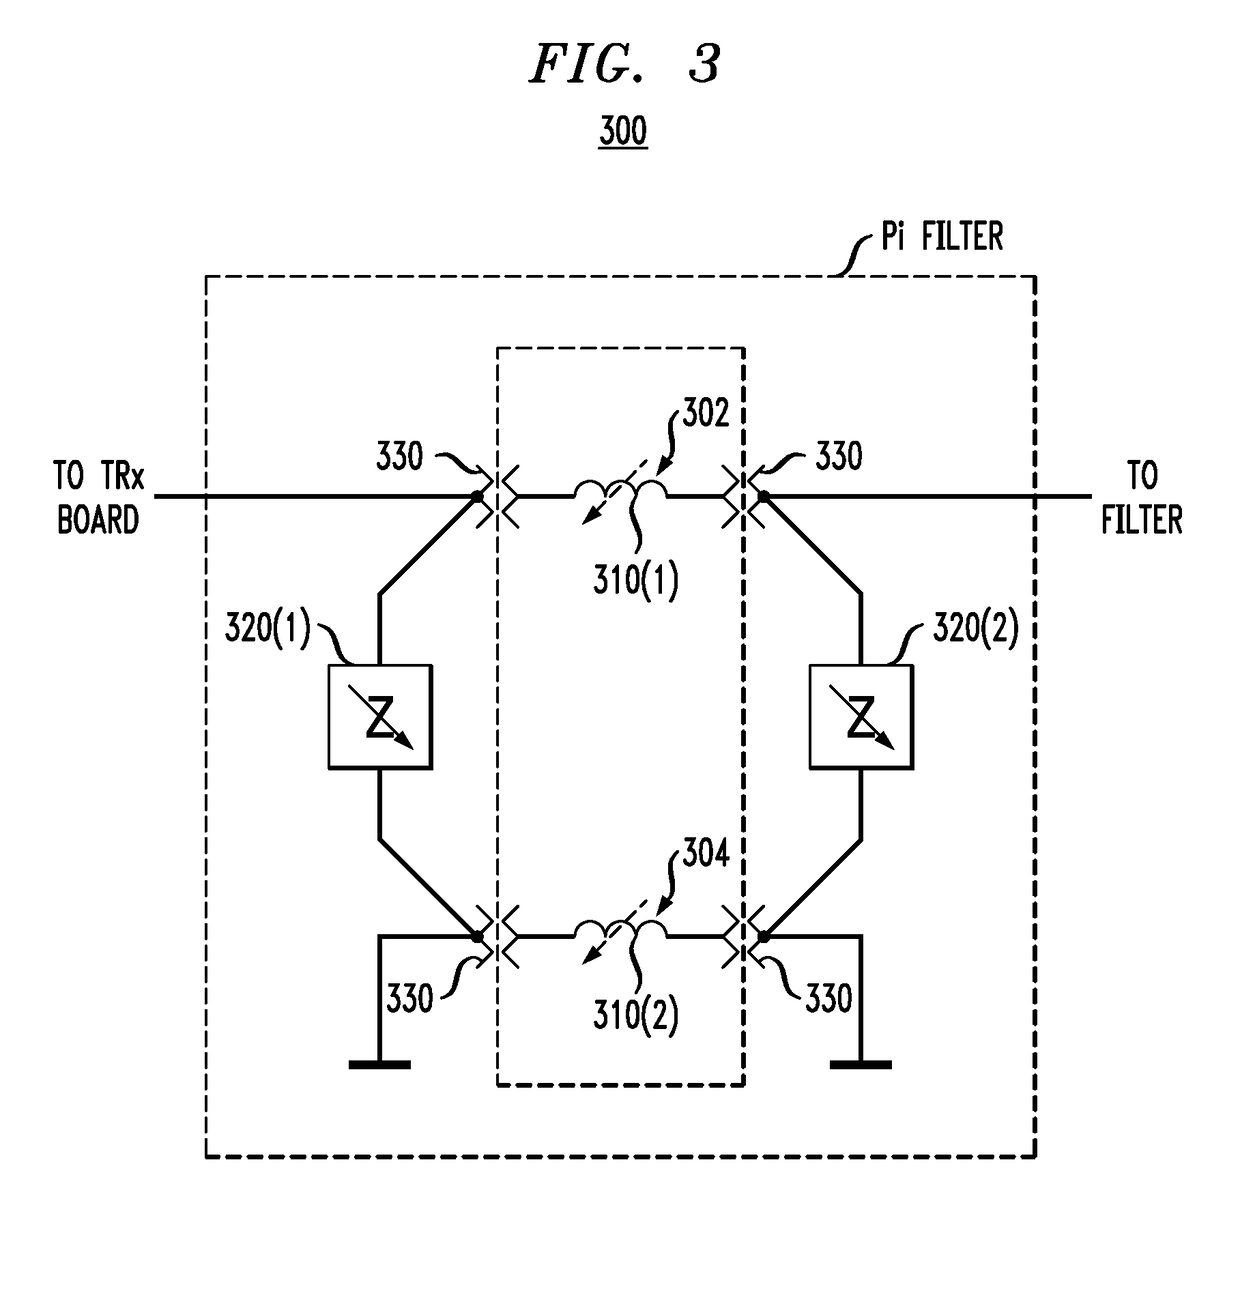 Interconnect element circuitry for RF electronics